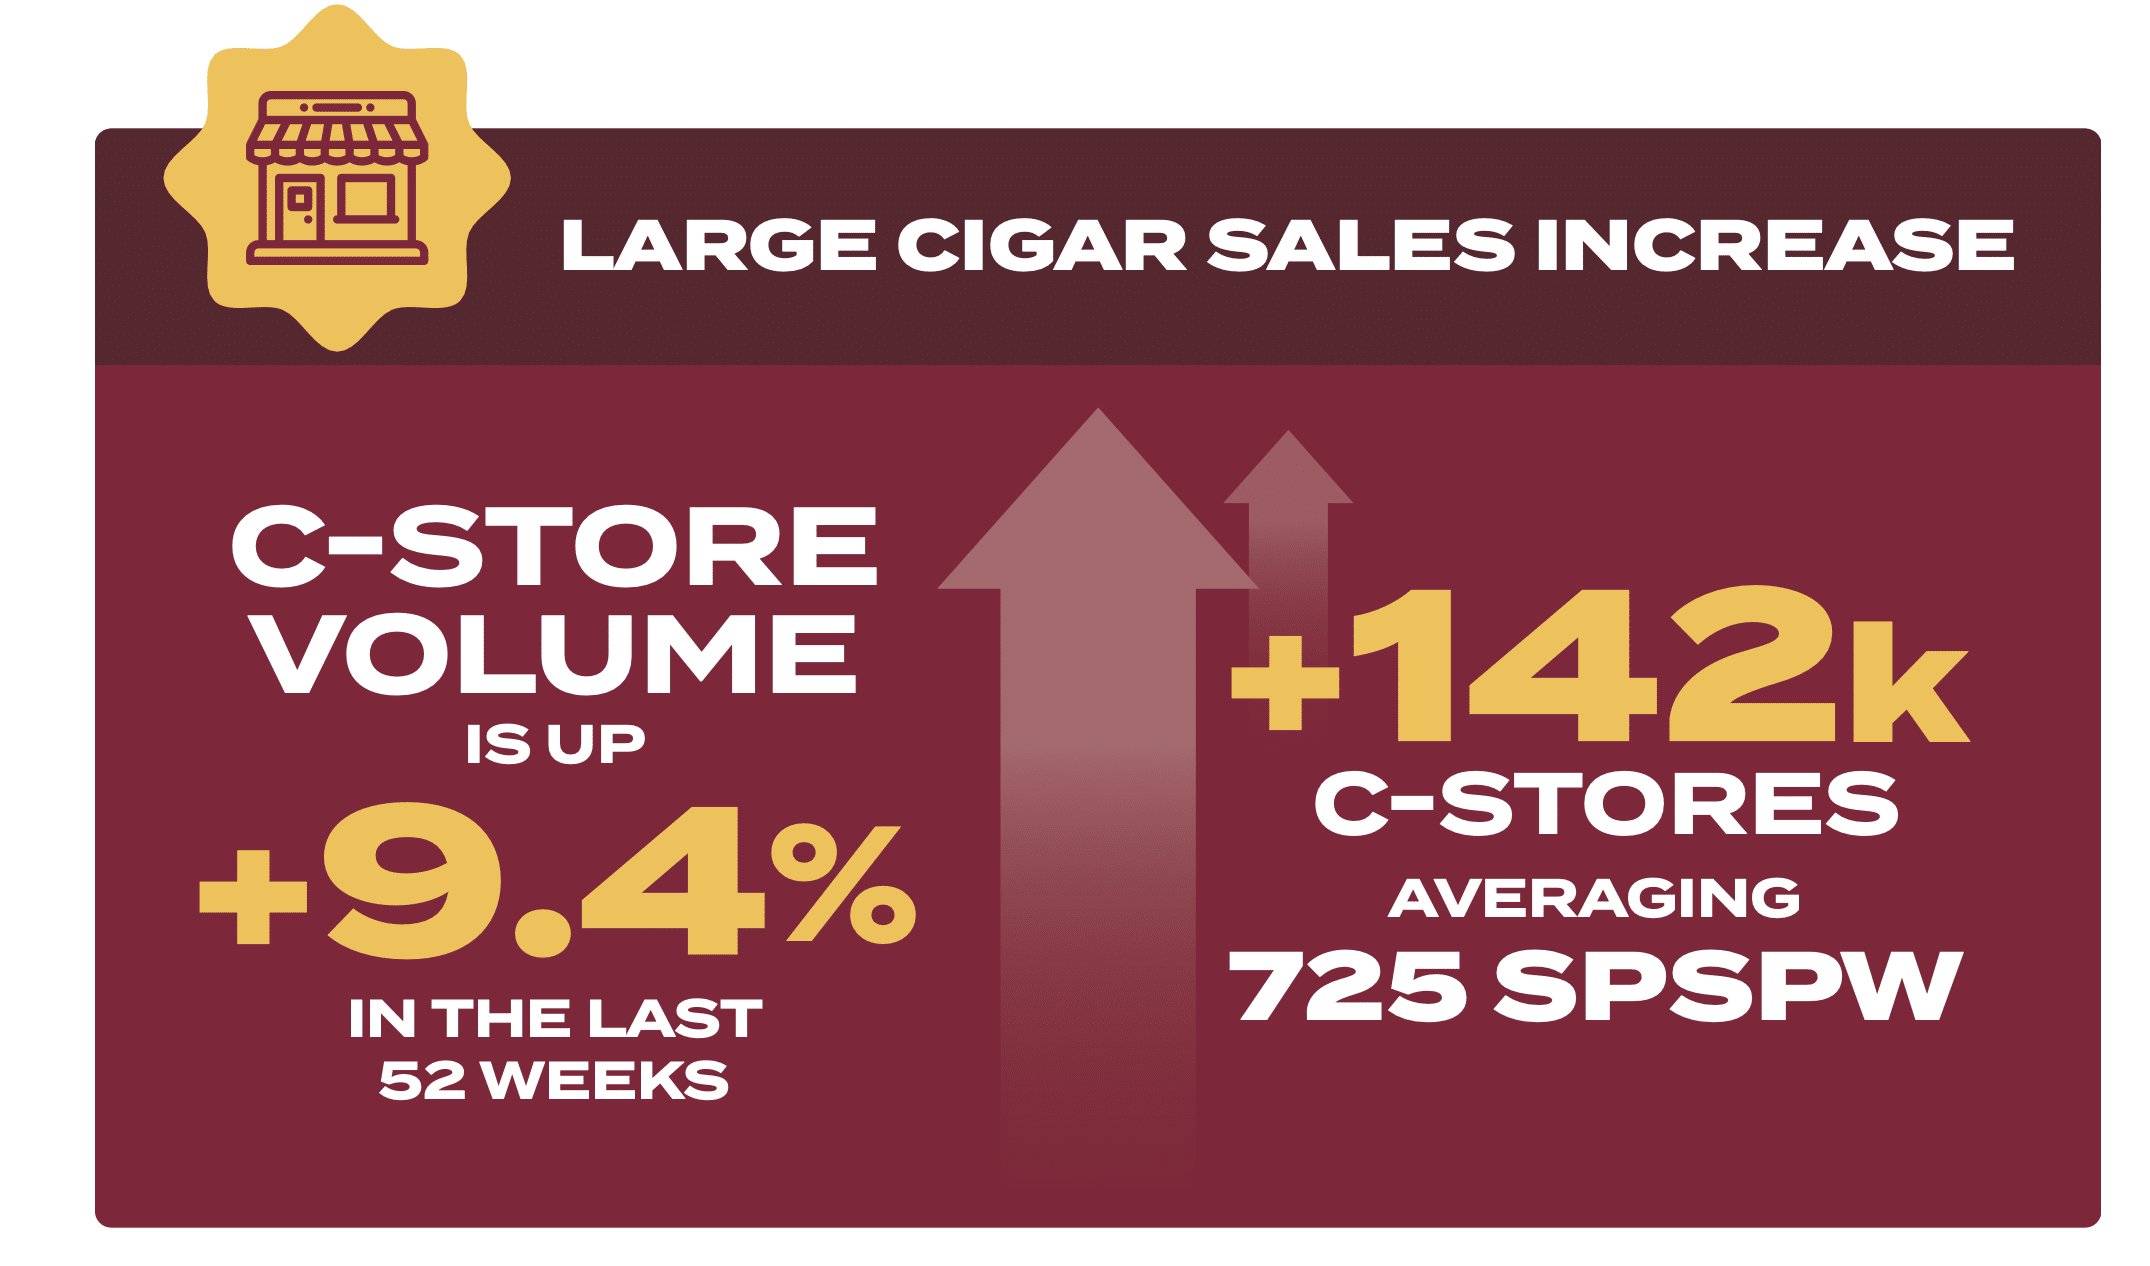 Swisher OTP and large cigar category growth trend for convenience stores